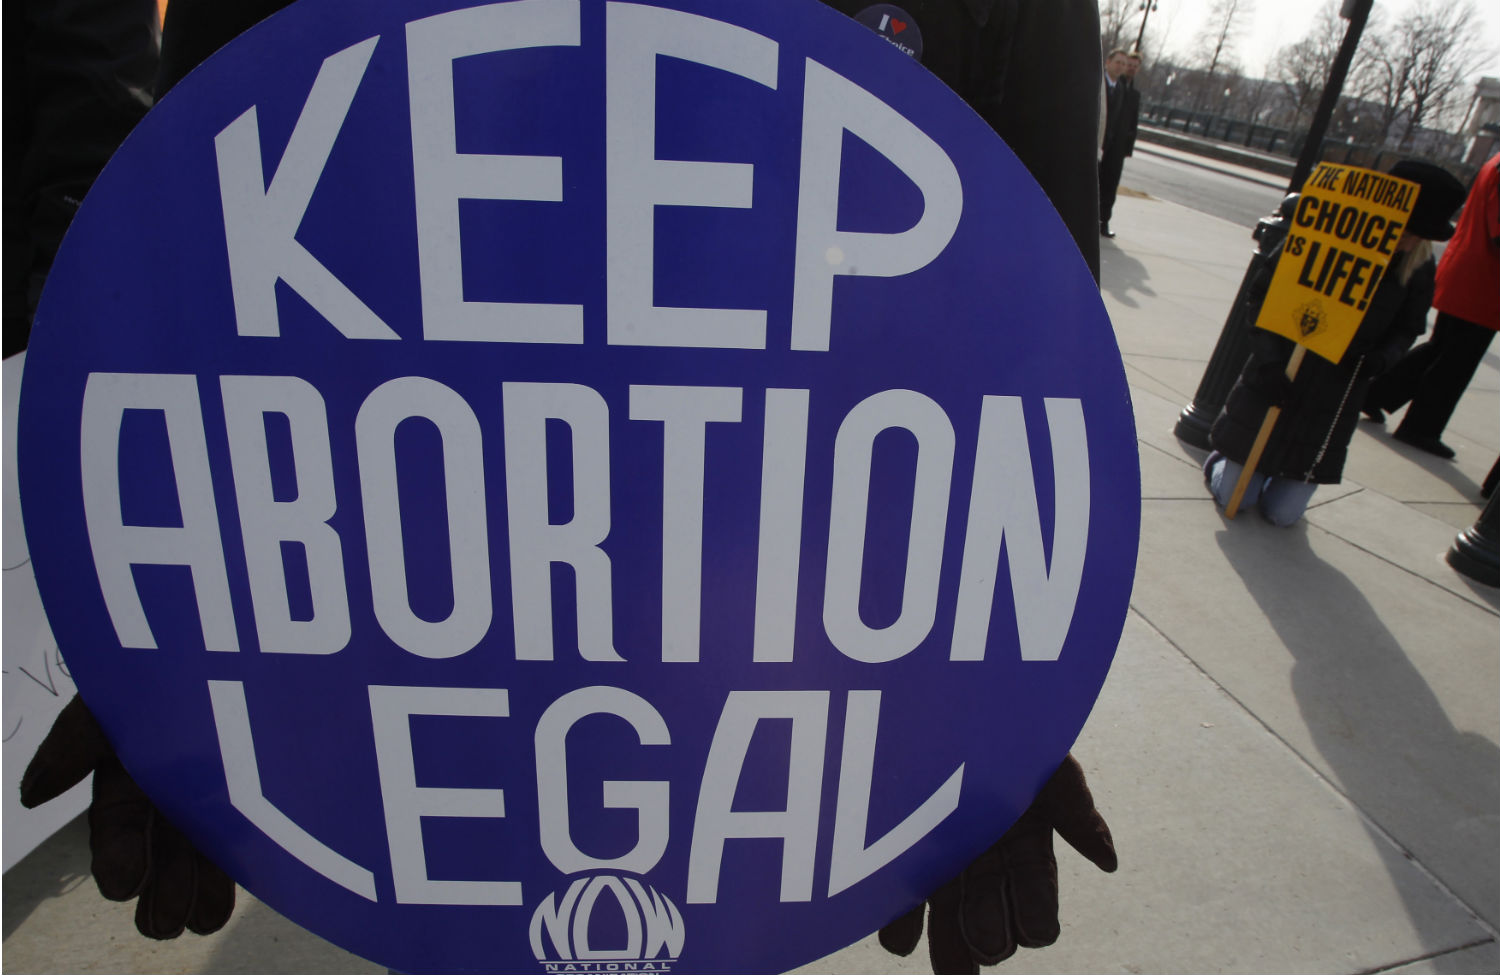 Tomorrow’s Election Could Determine the Future of Abortion Politics